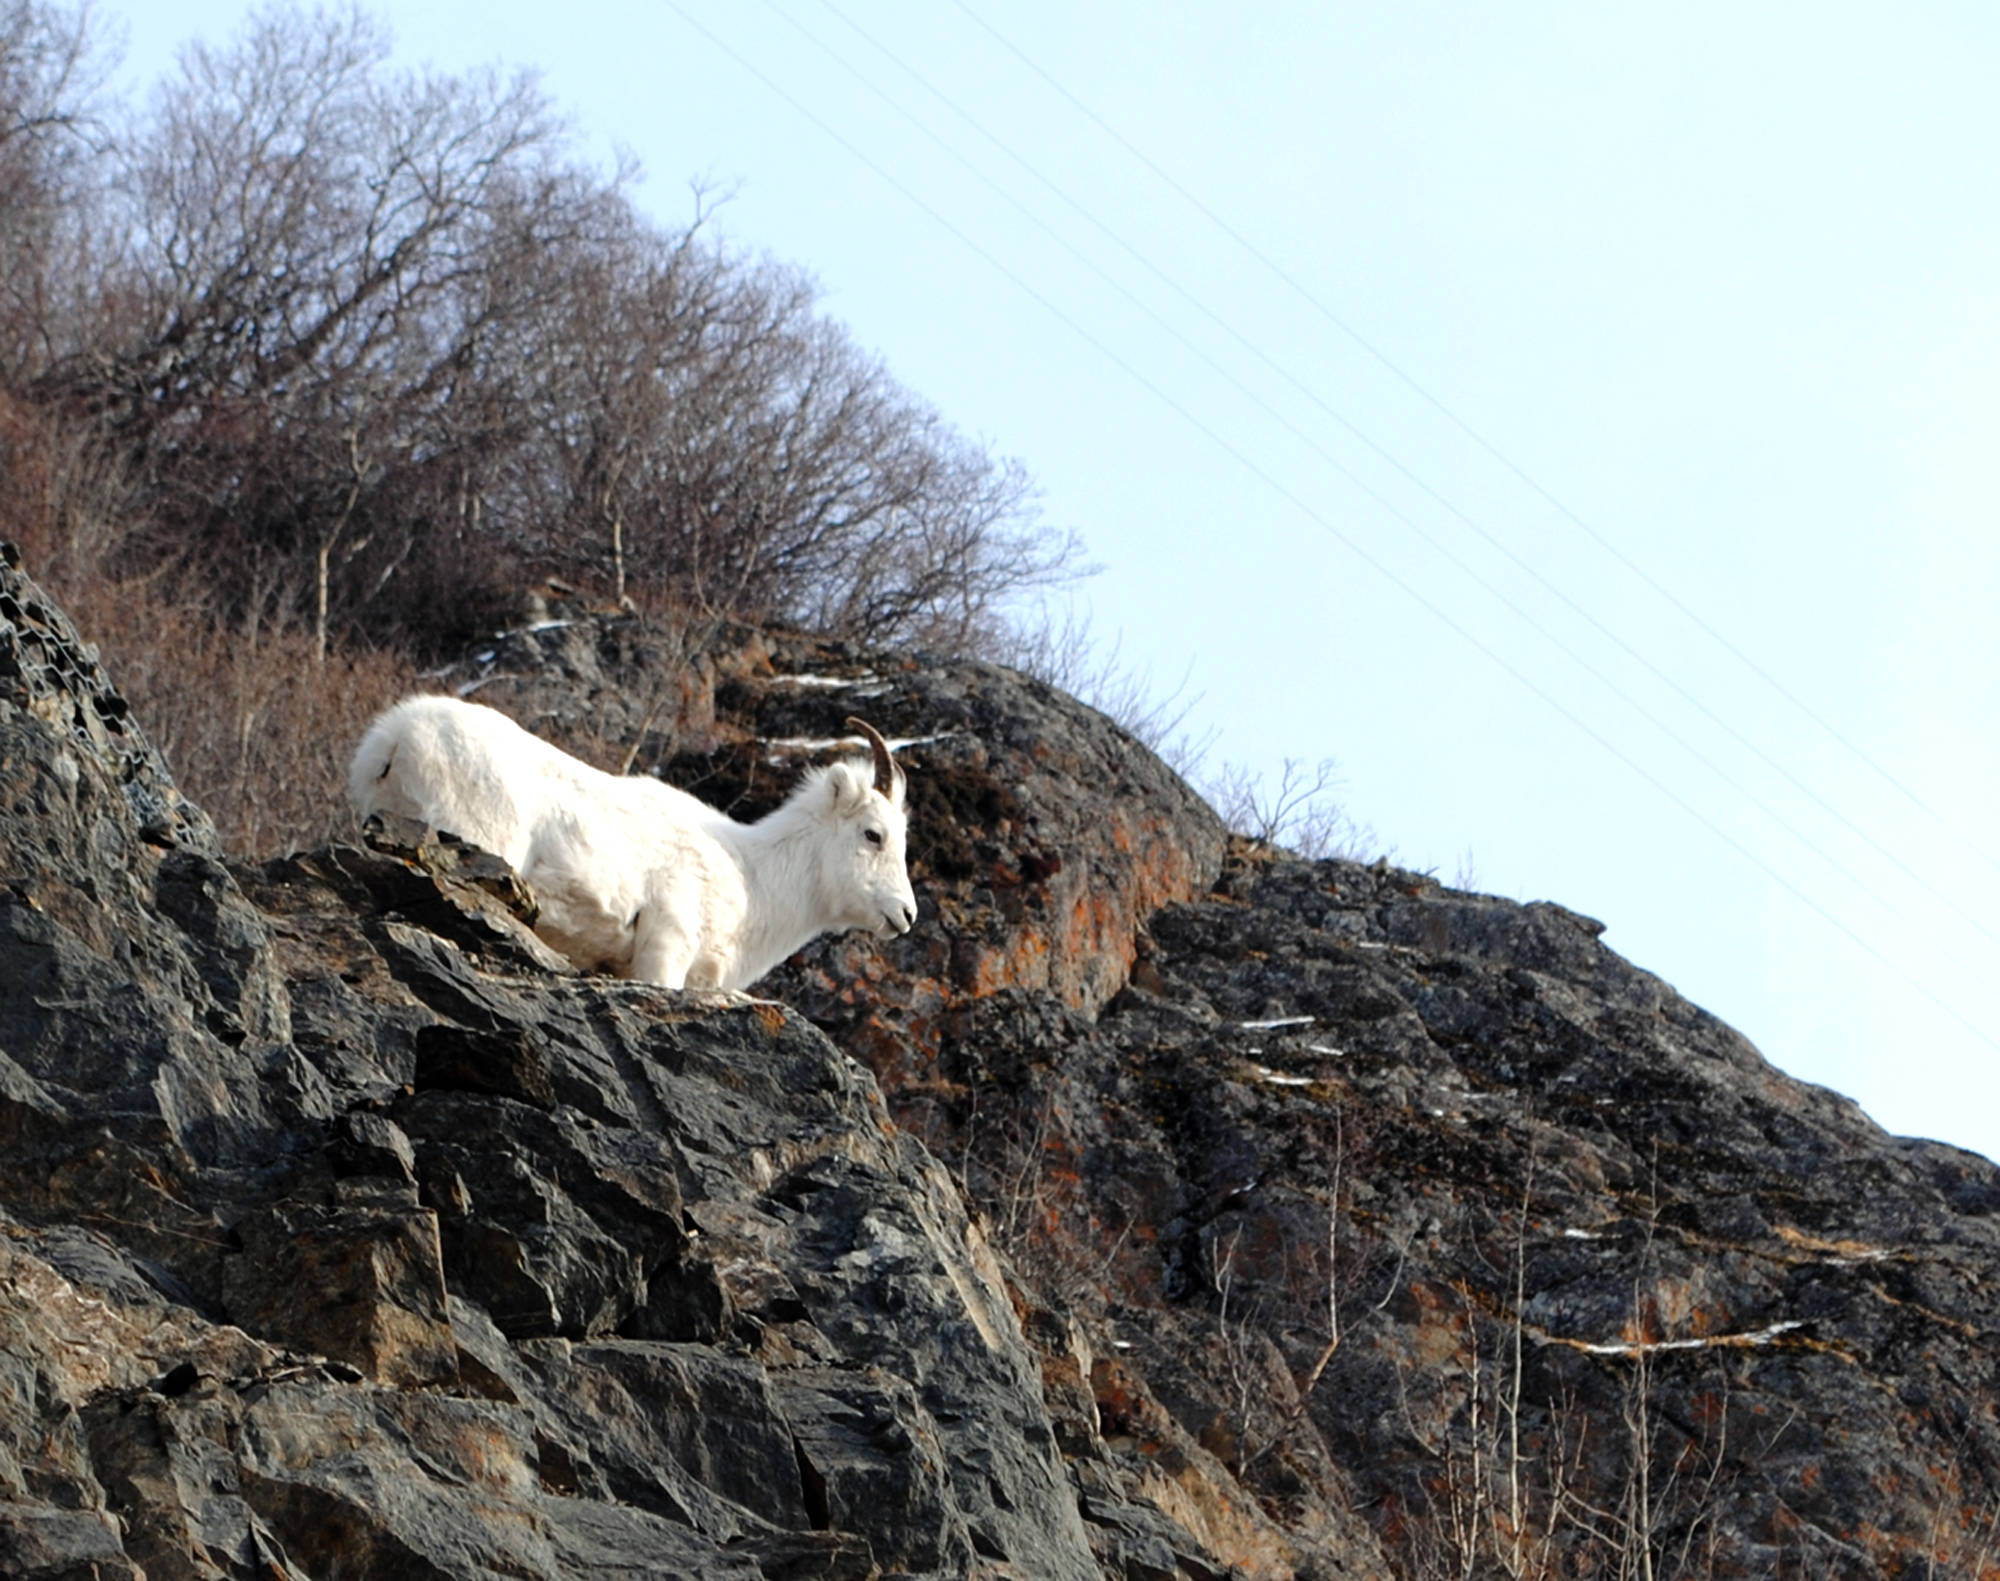 A young dall sheep scales the rockface along the Seward Highway near Girdwood in March. (Photo by Kat Sorensen/Peninsula Clarion)